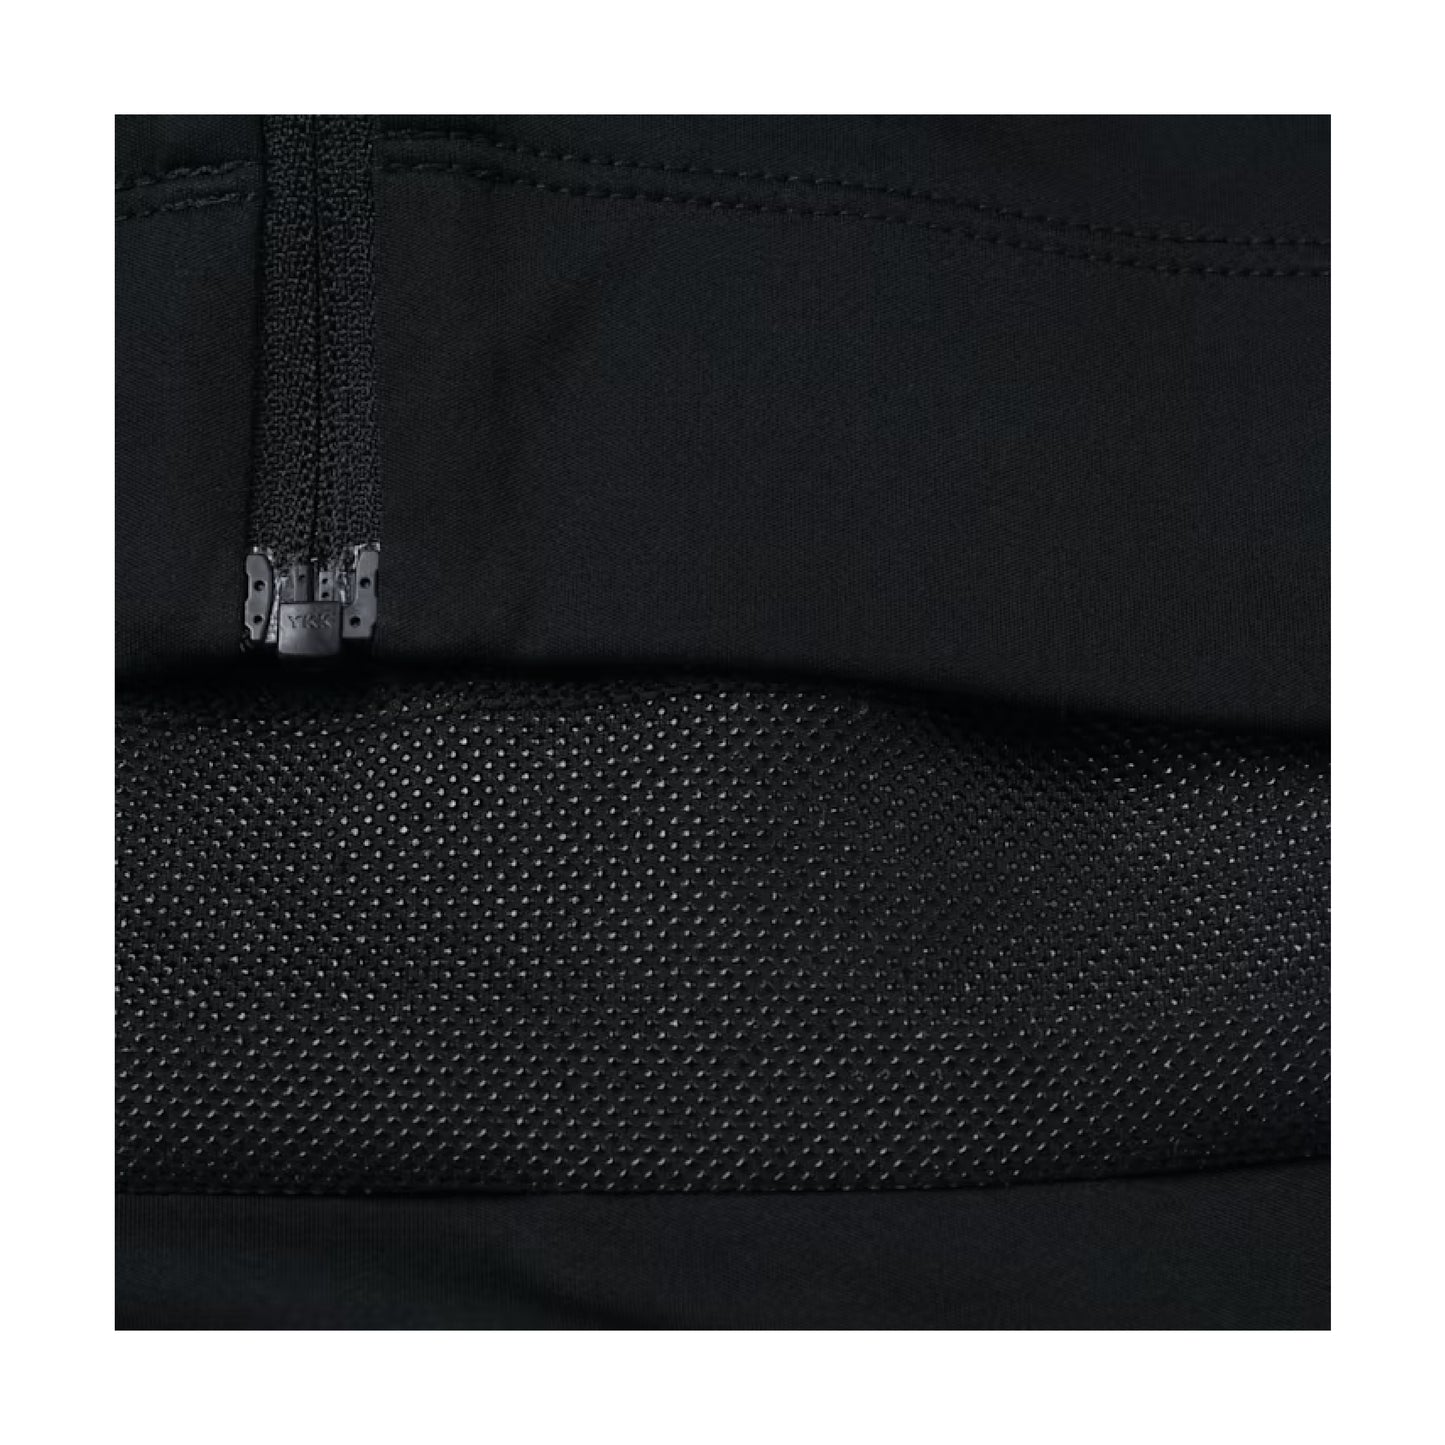 RAPHA Core Lightweight Jersey Maillot Ciclismo - BLK Black